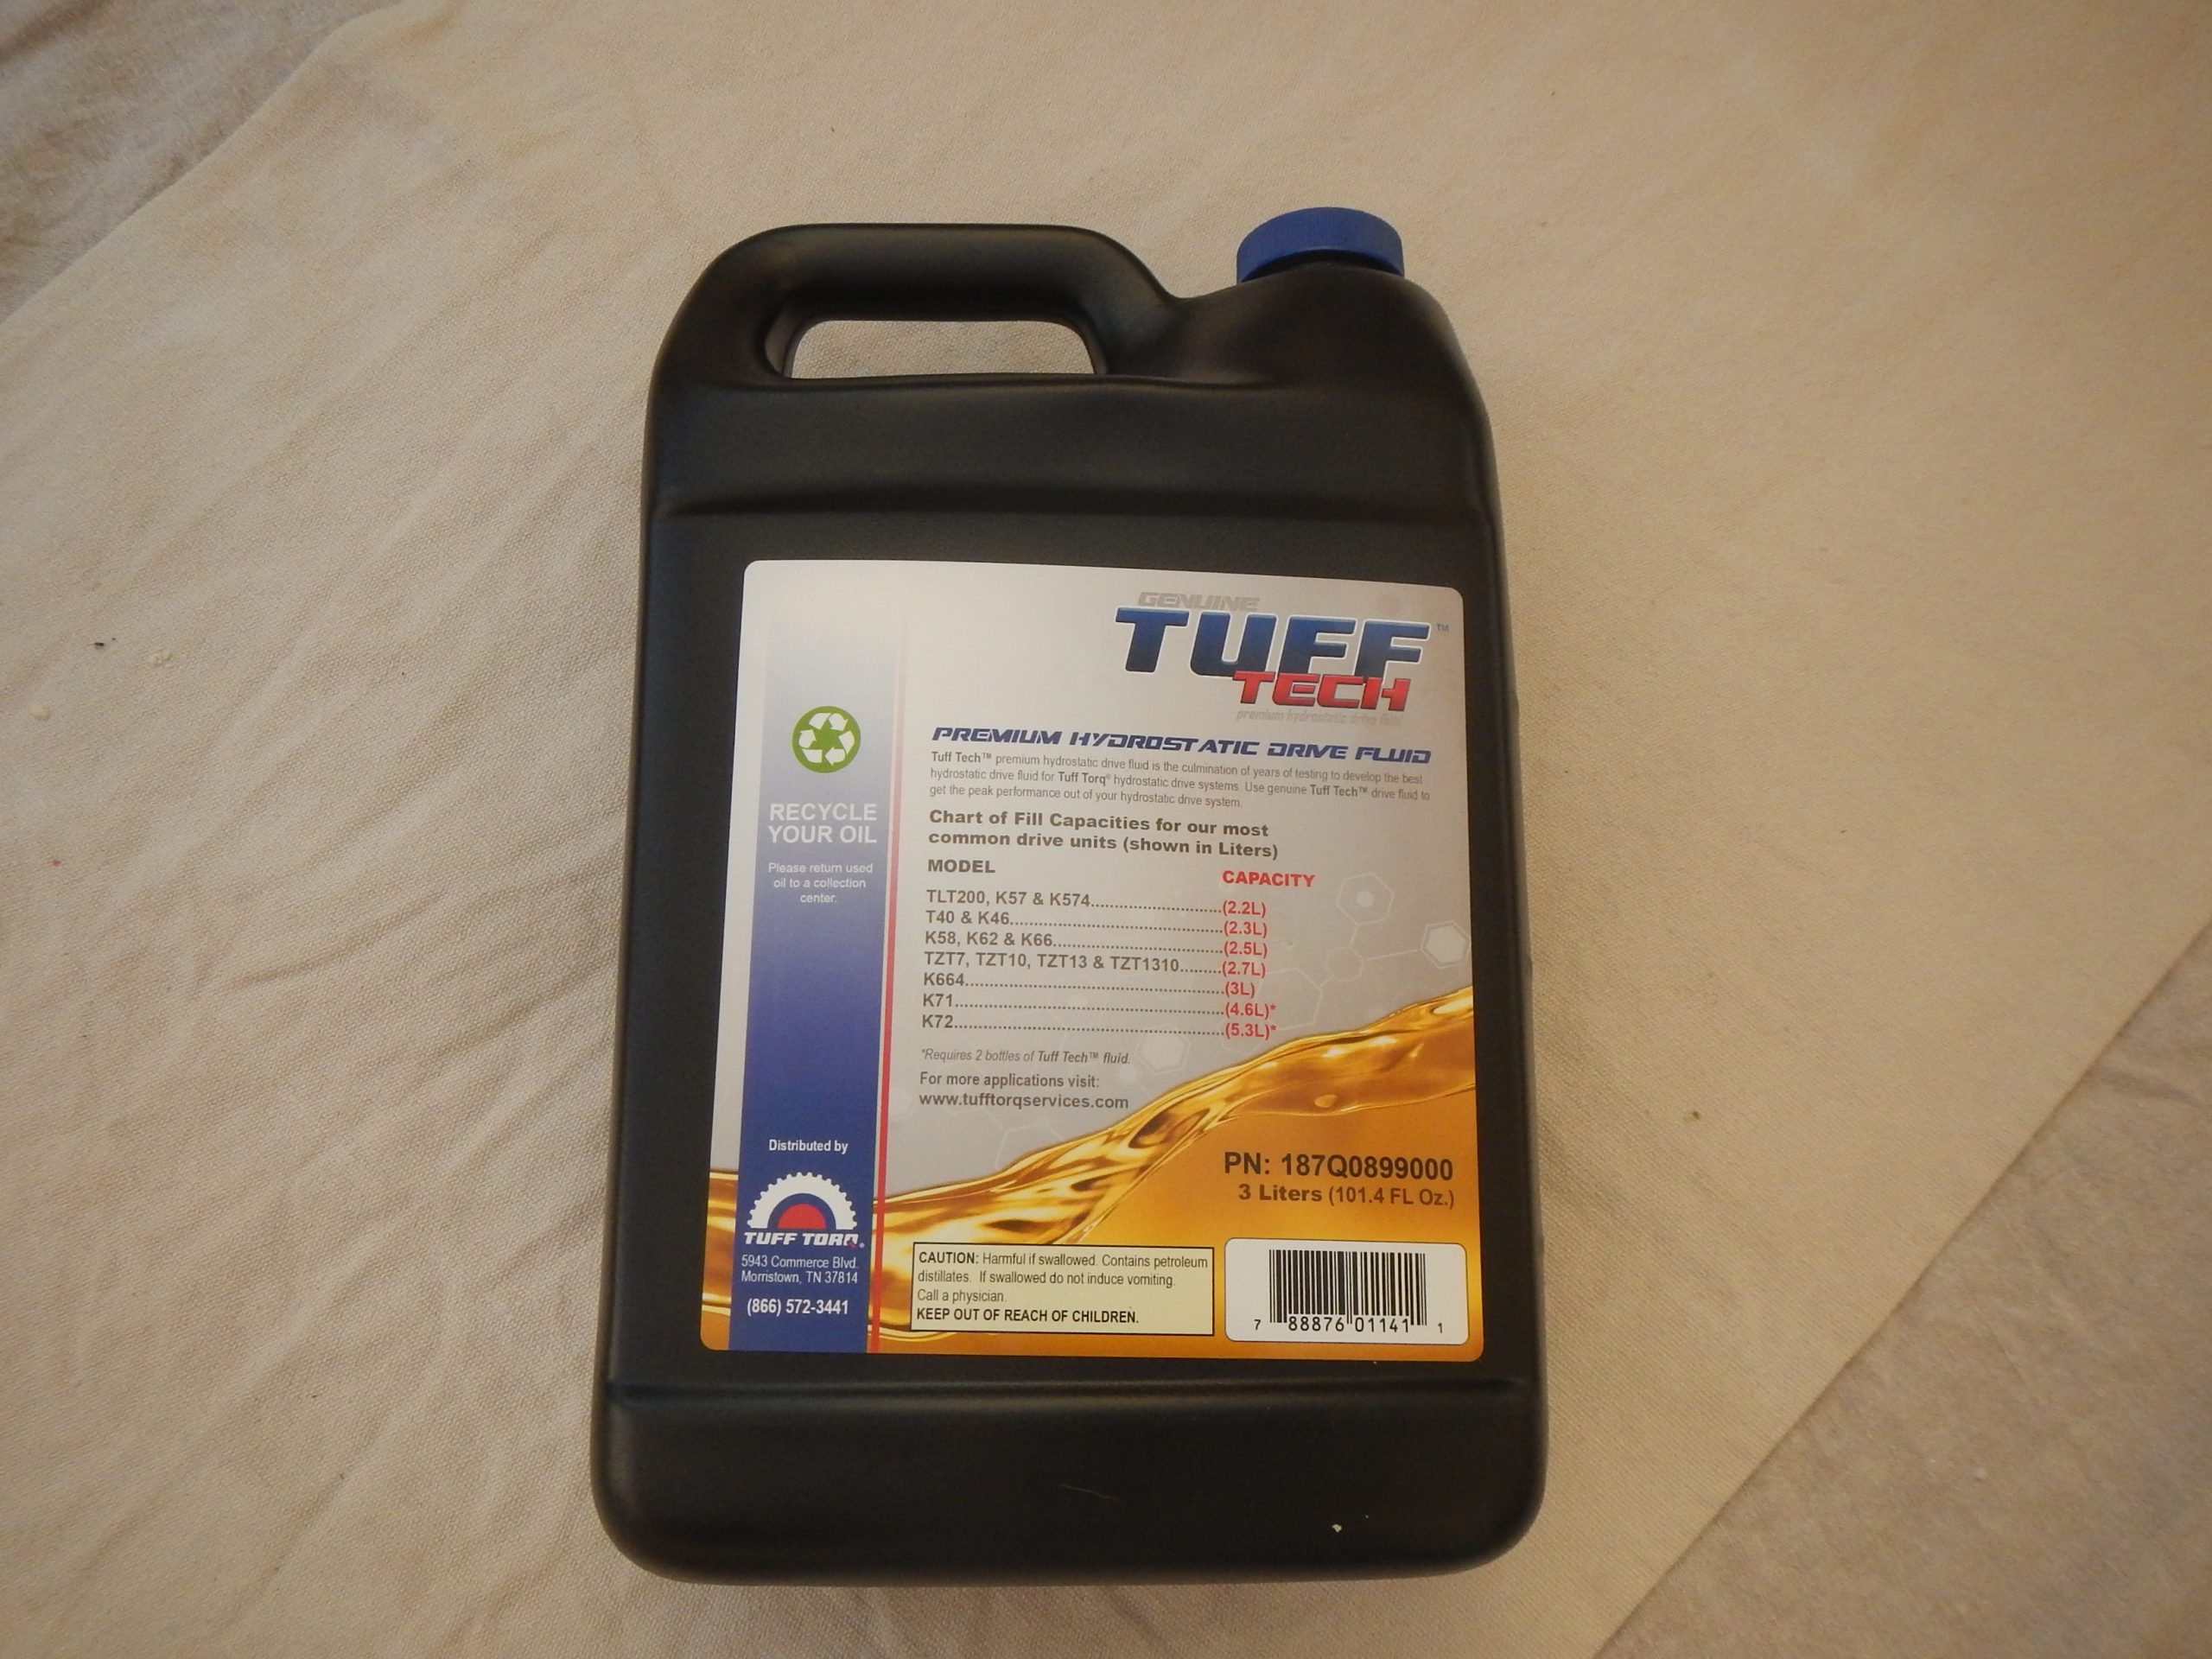 Tuff Torq Hydrostatic Oil/Drive Fluid 3 litres – Spares4mowers - All the  spares for lawnmowers you will ever need